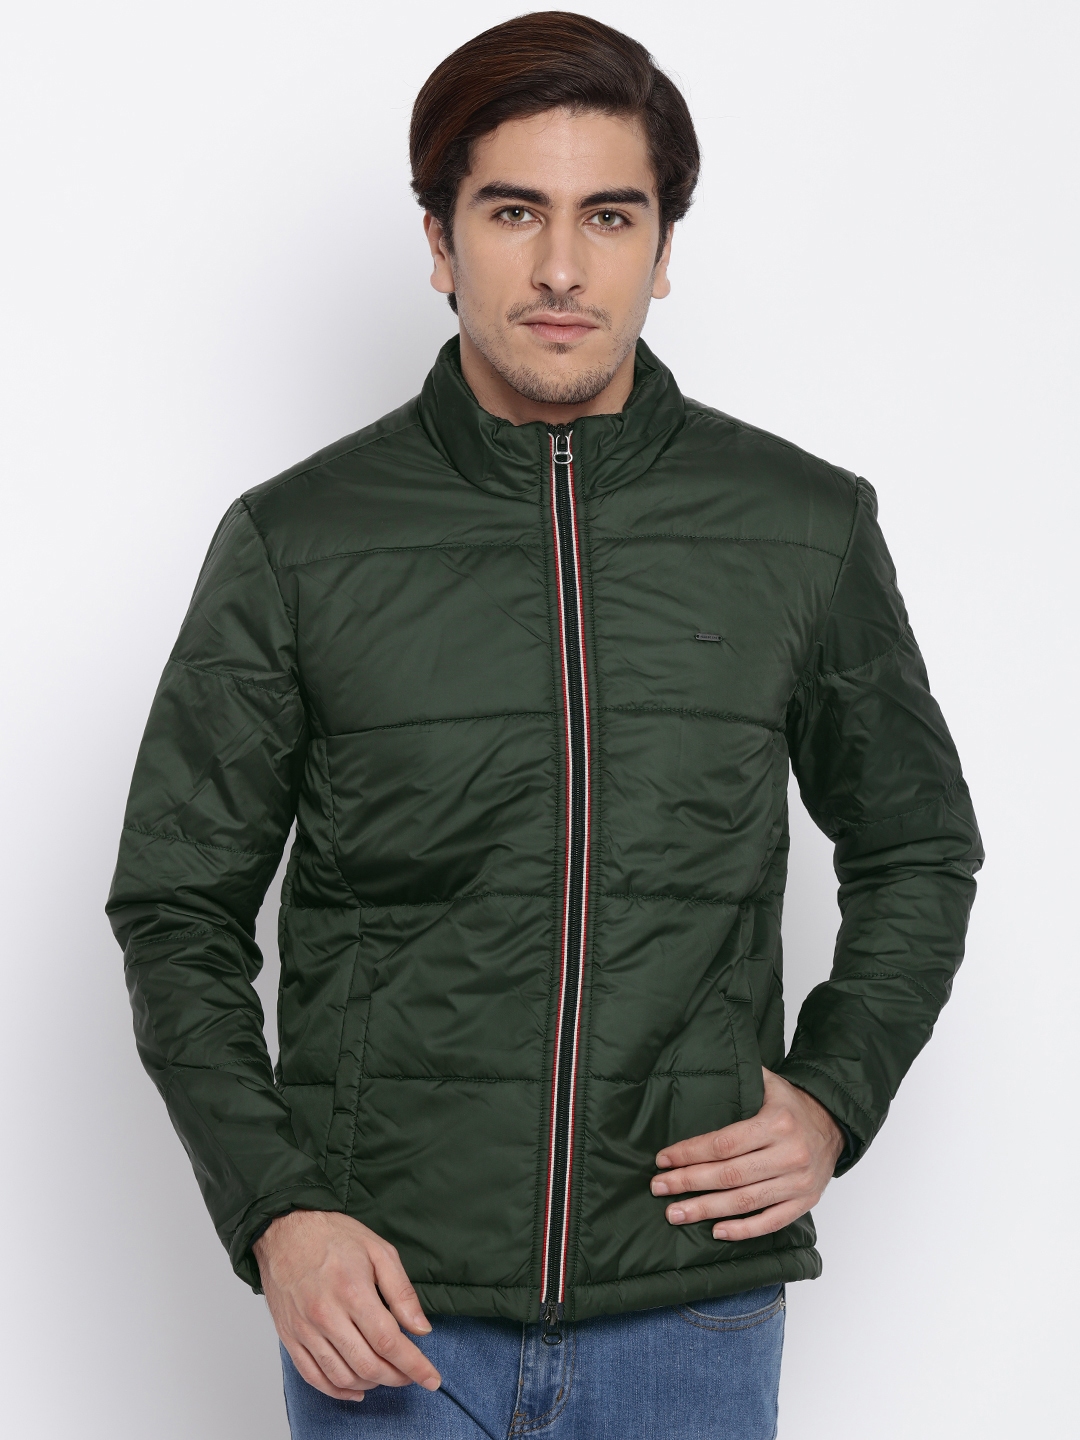 Buy Numero Uno Olive Green Quilted Jacket - Jackets for Men 1620526 ...